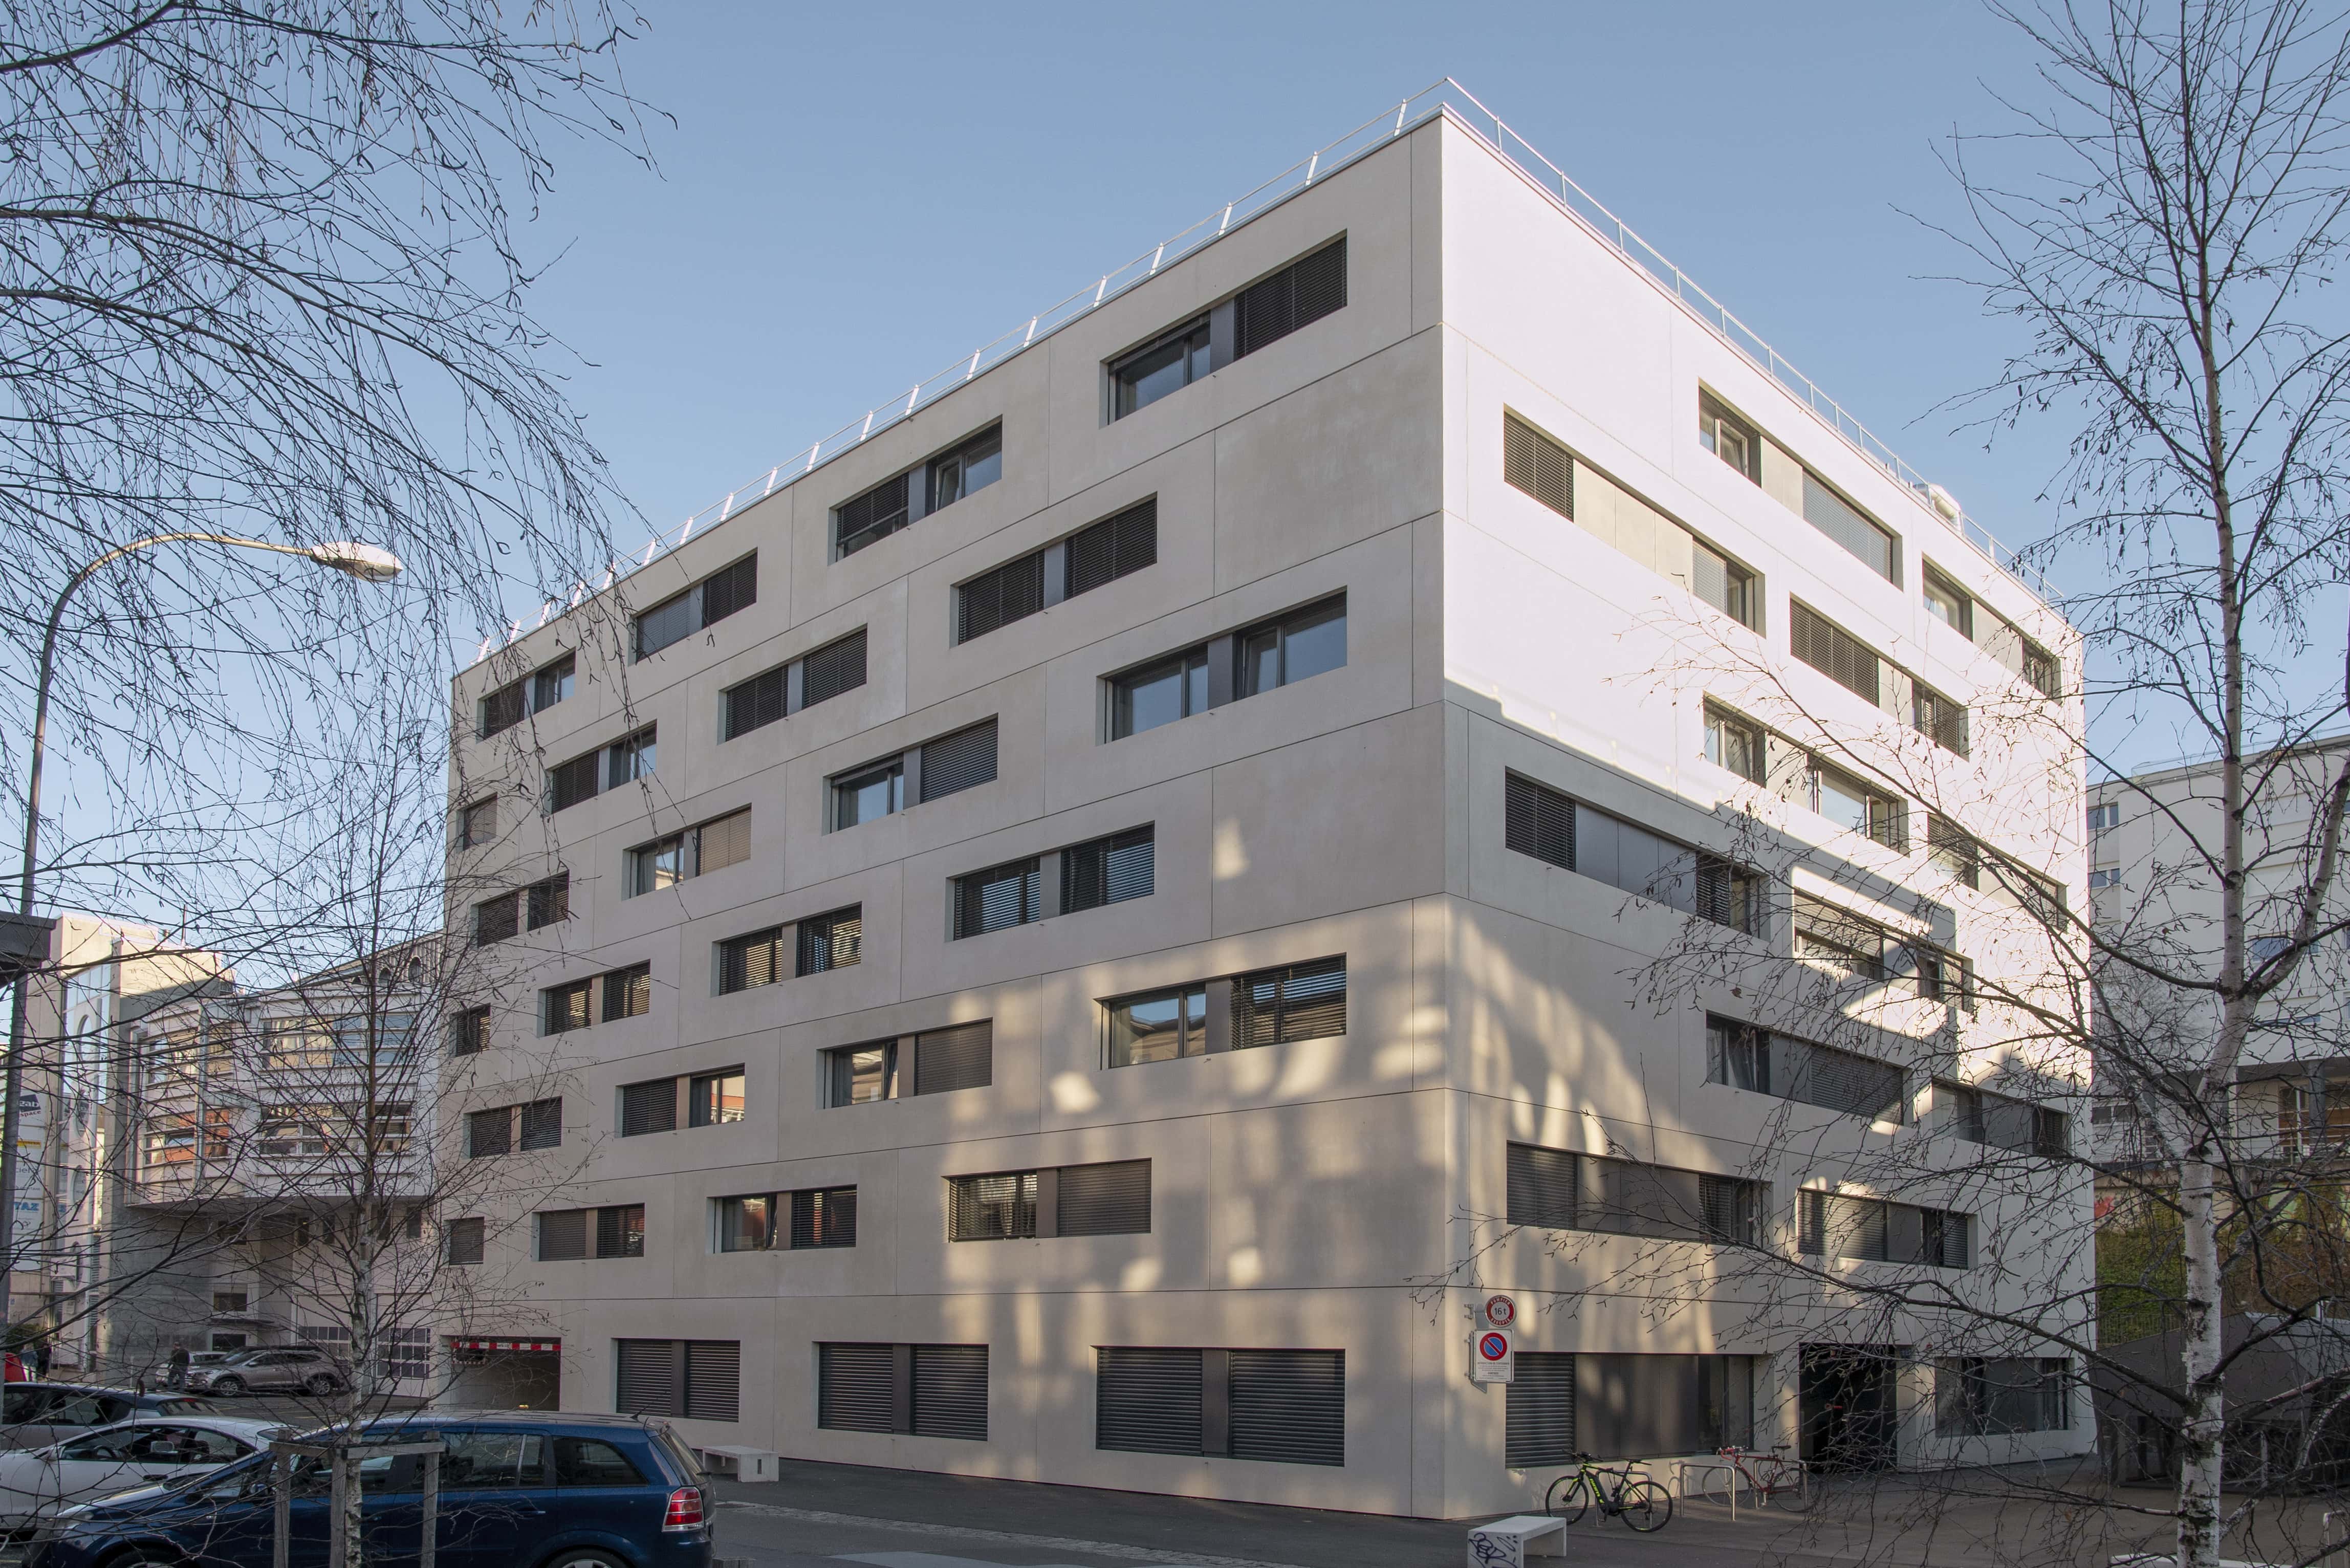 Inauguration of the Square student residence in the heart of Lausanne